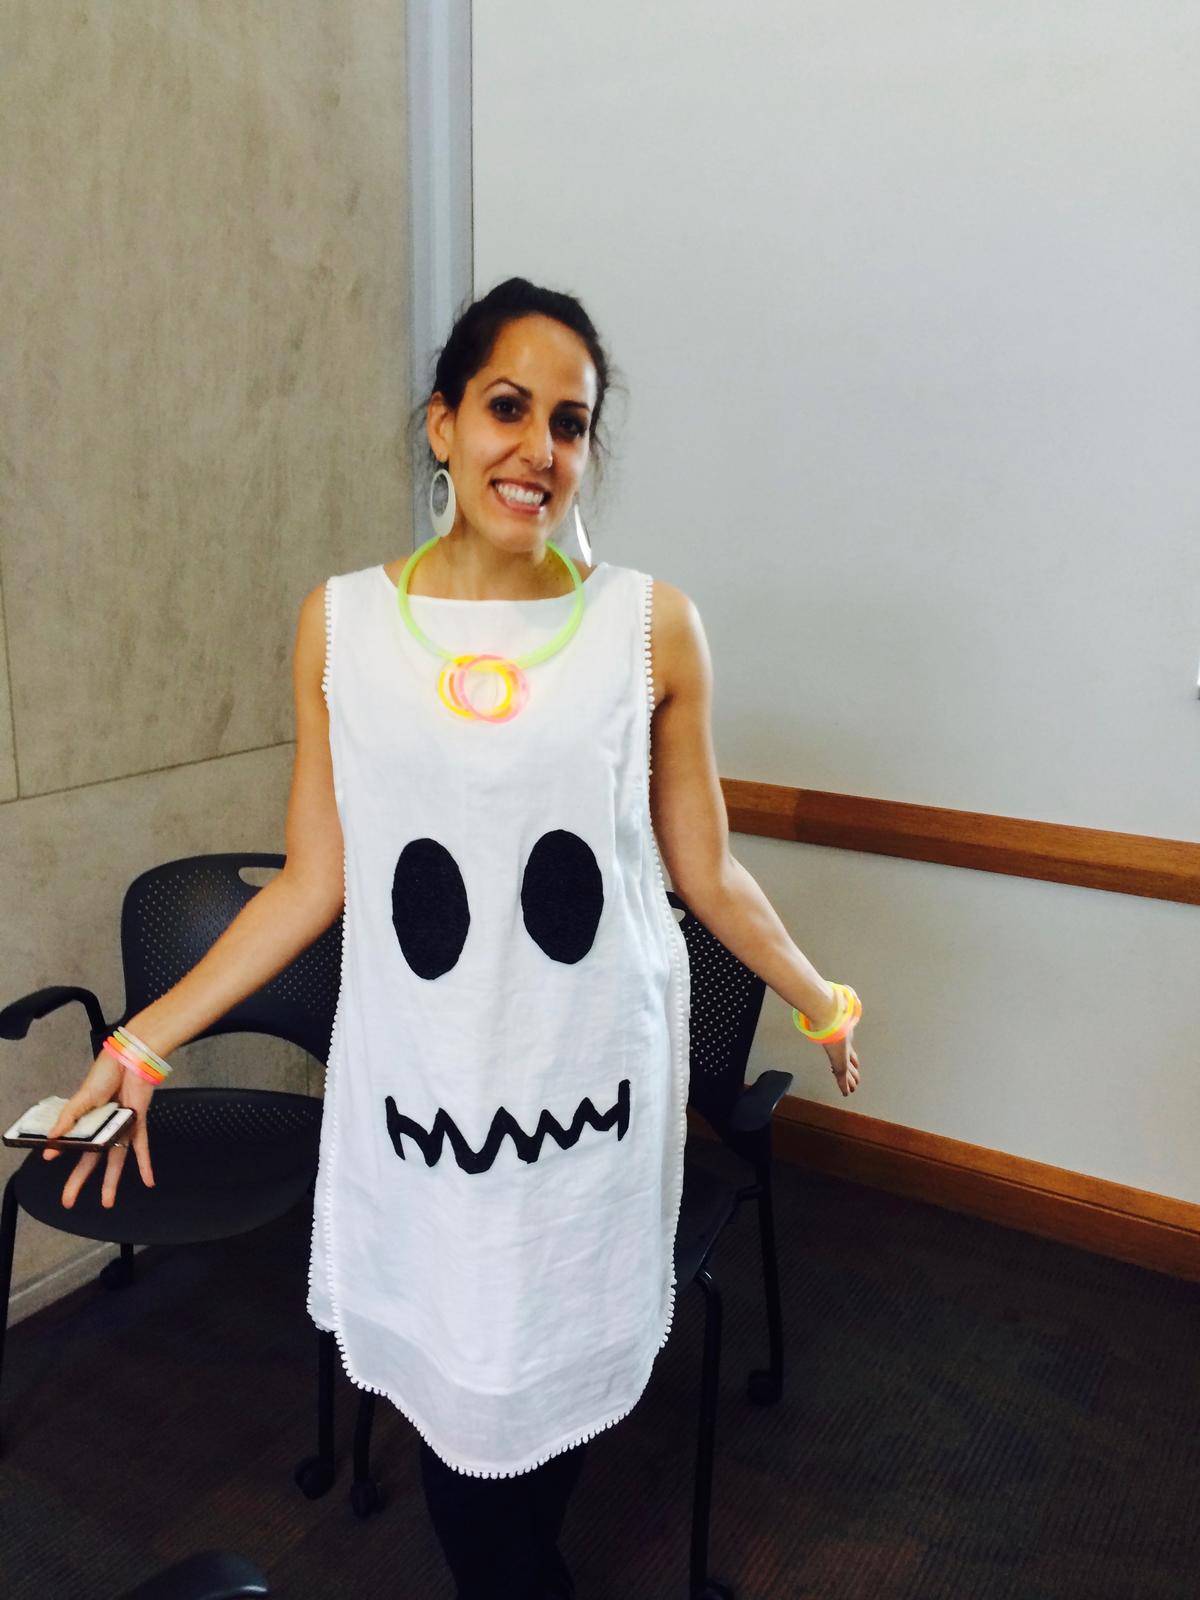 Halloween 2015...Guess what lab equipment puns we are!